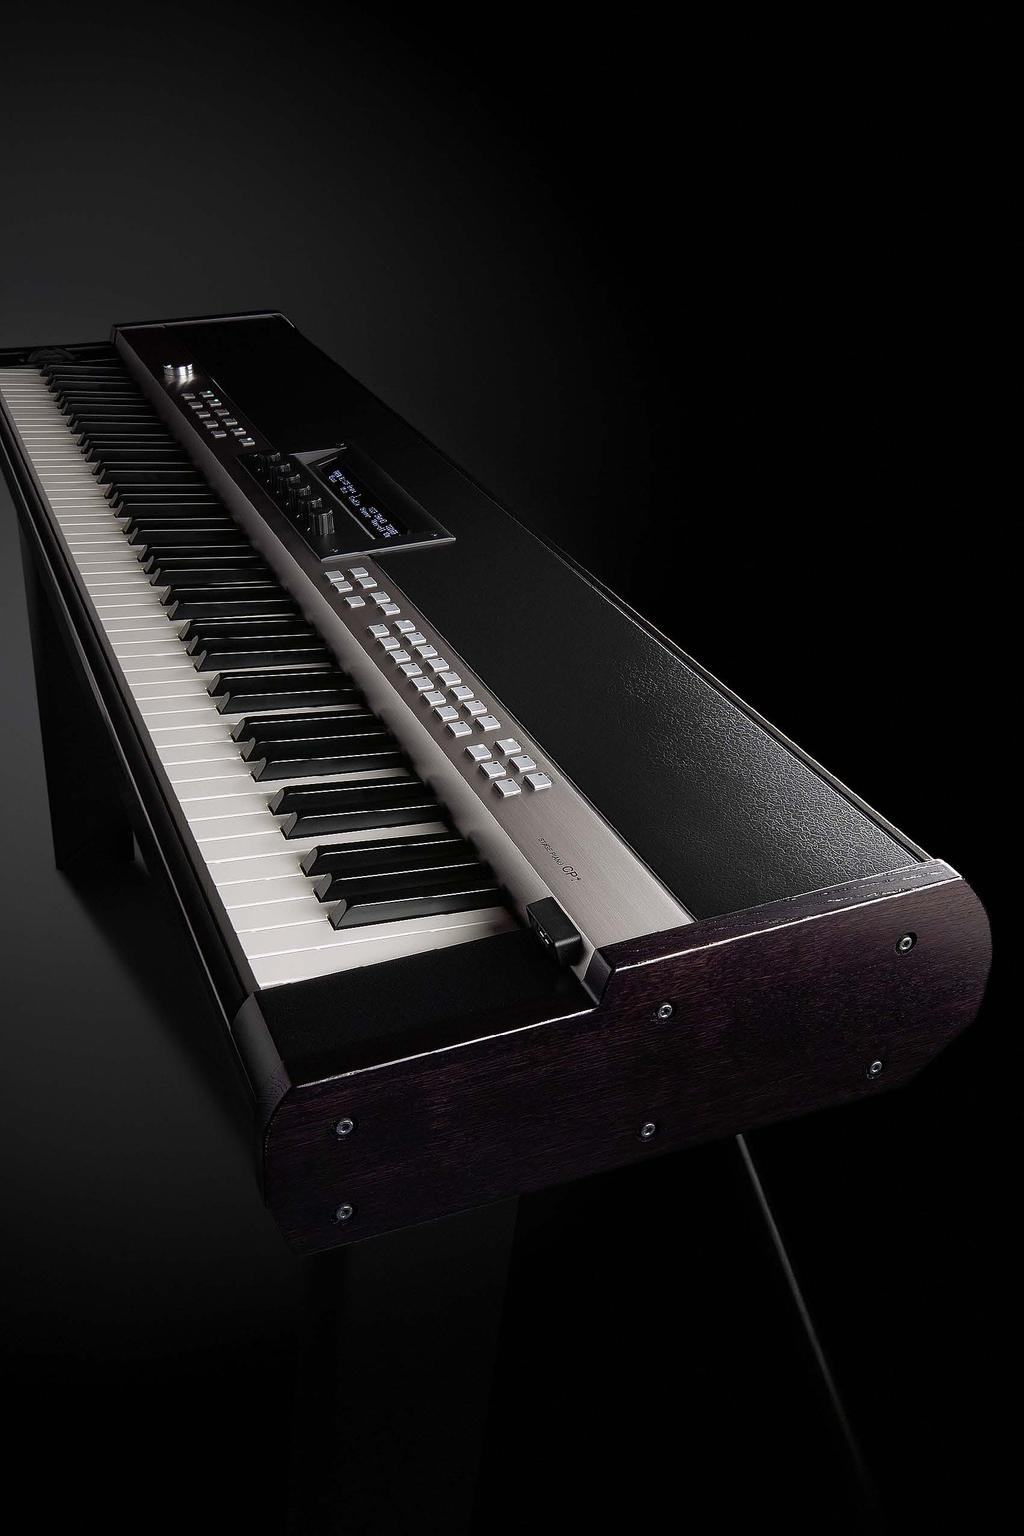 YAMAHA CP1 ARTIST PERFORMANCES A free soundset in excellent quality is abvailable for every CP1 user.